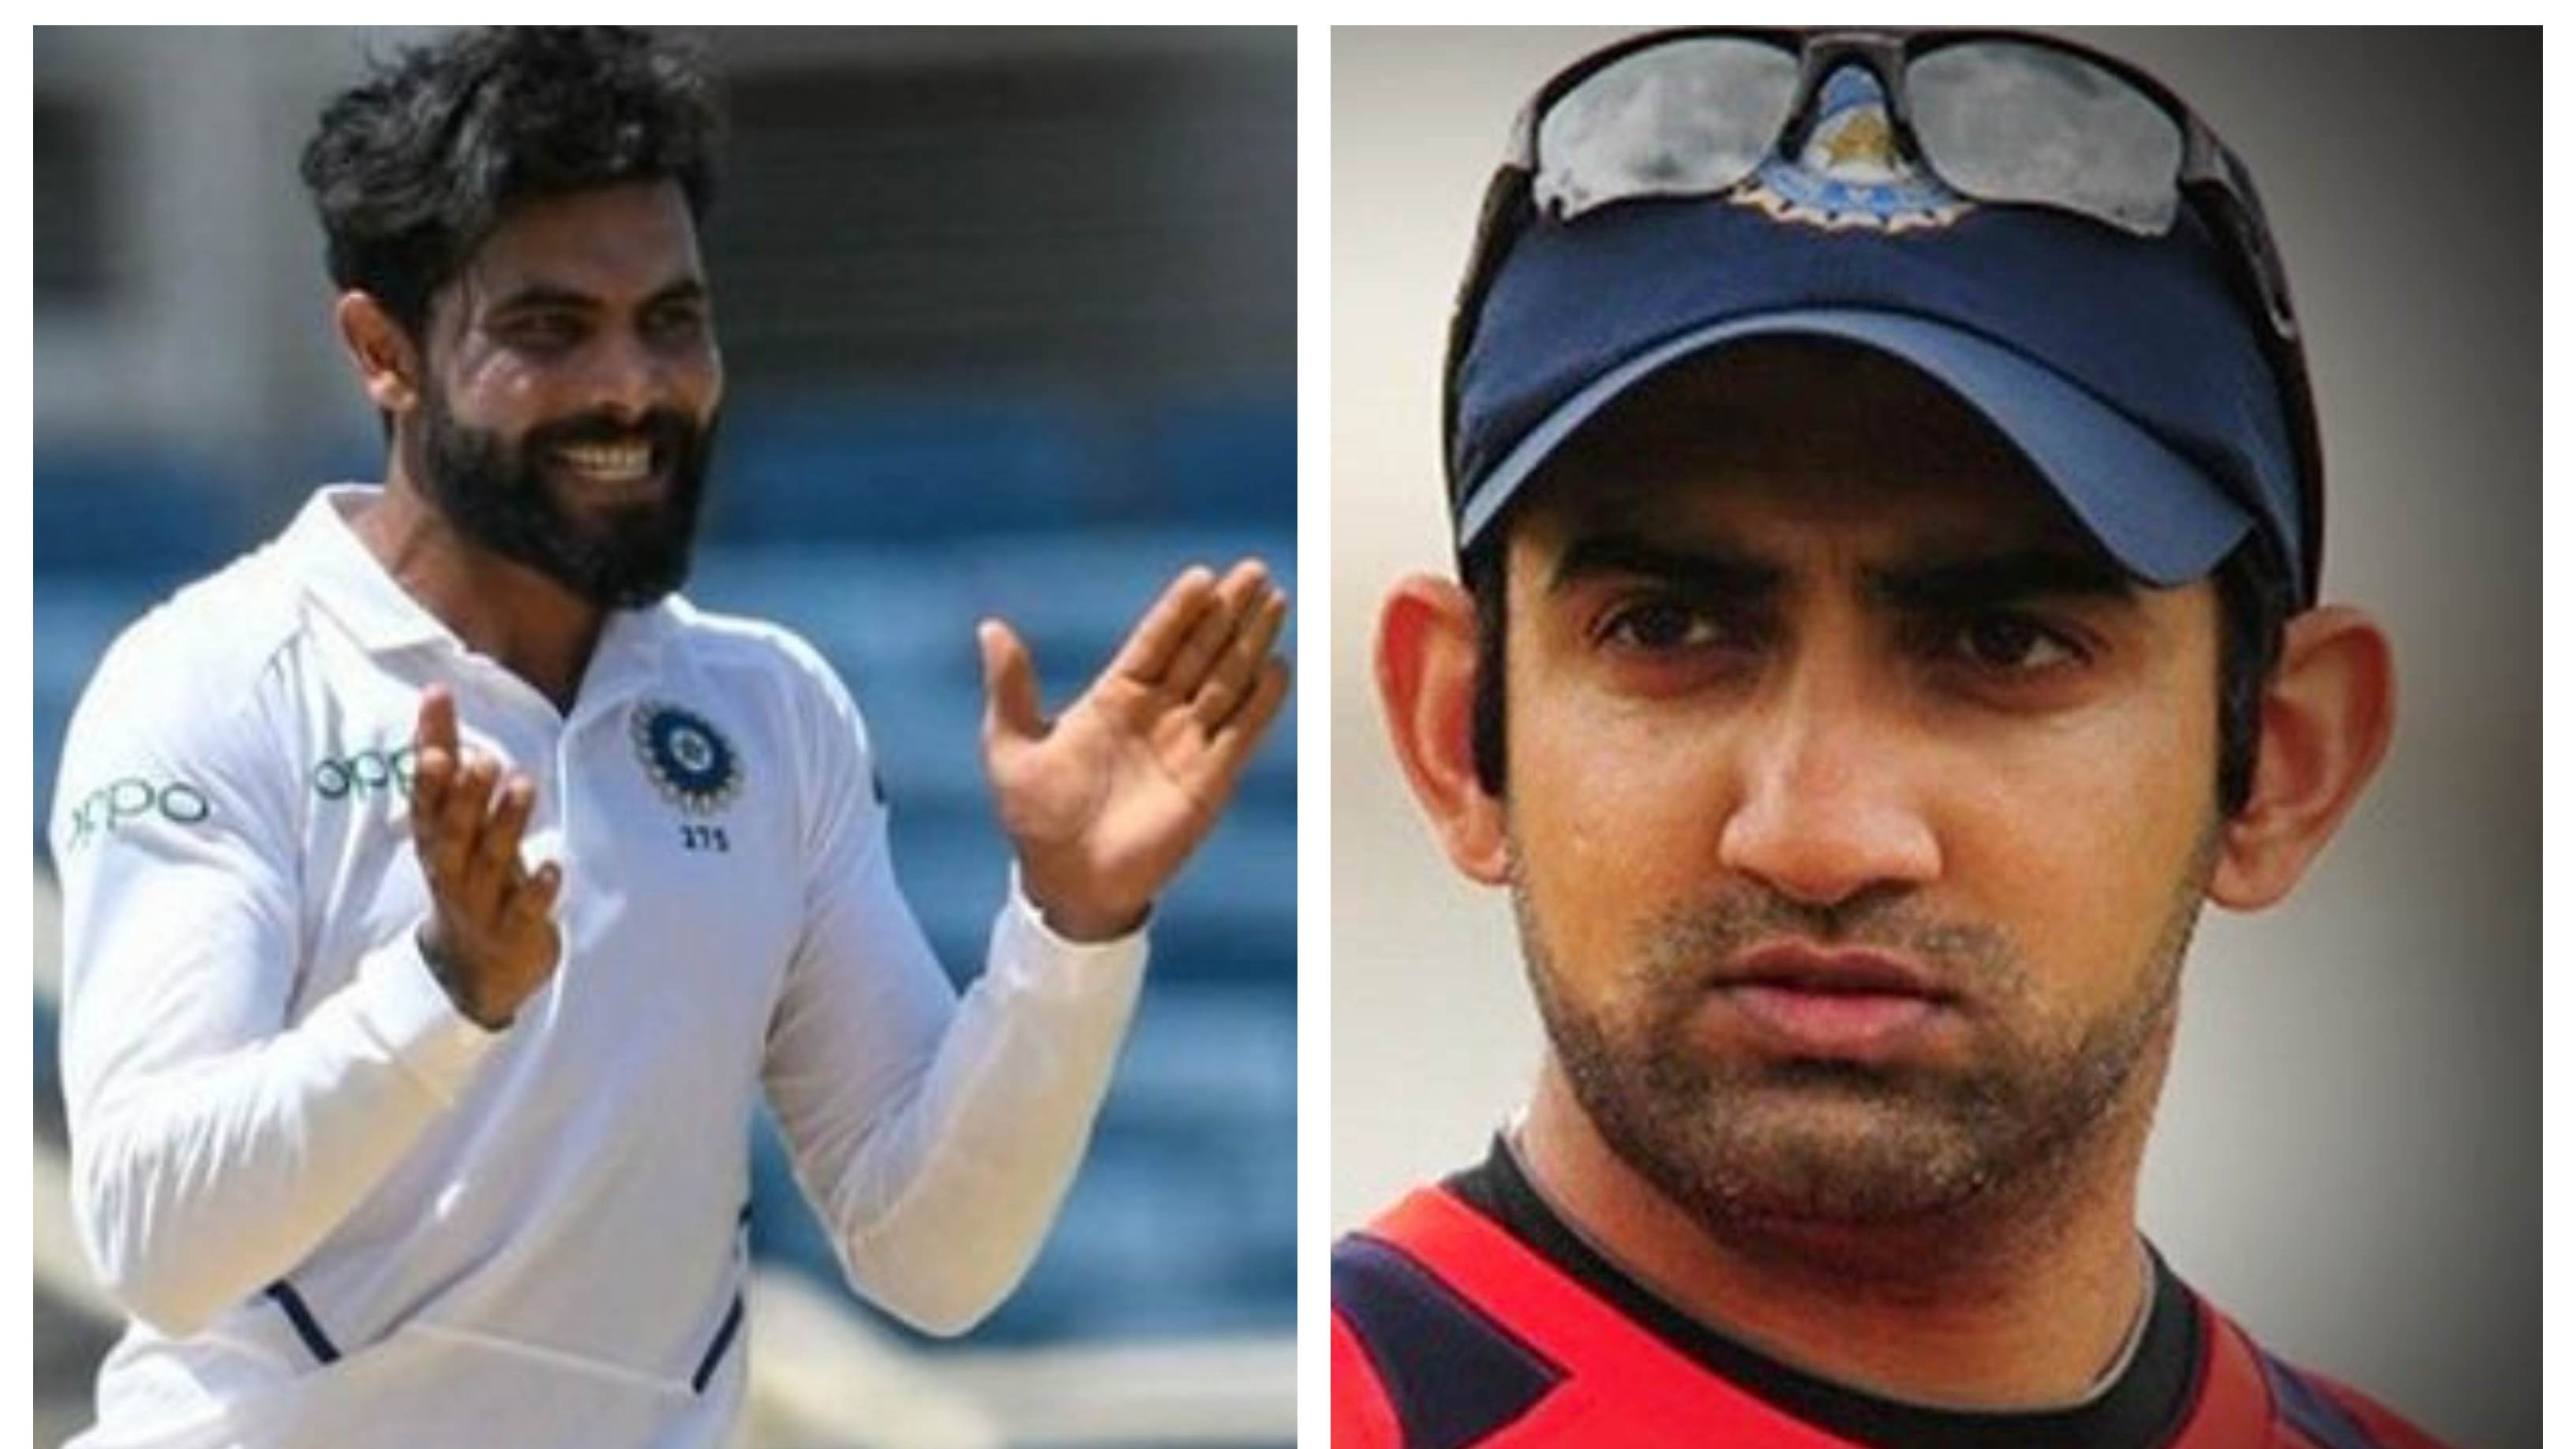 AUS v IND 2020-21: Gautam Gambhir bats for Ravindra Jadeja’s inclusion in the playing XI for 2nd Test